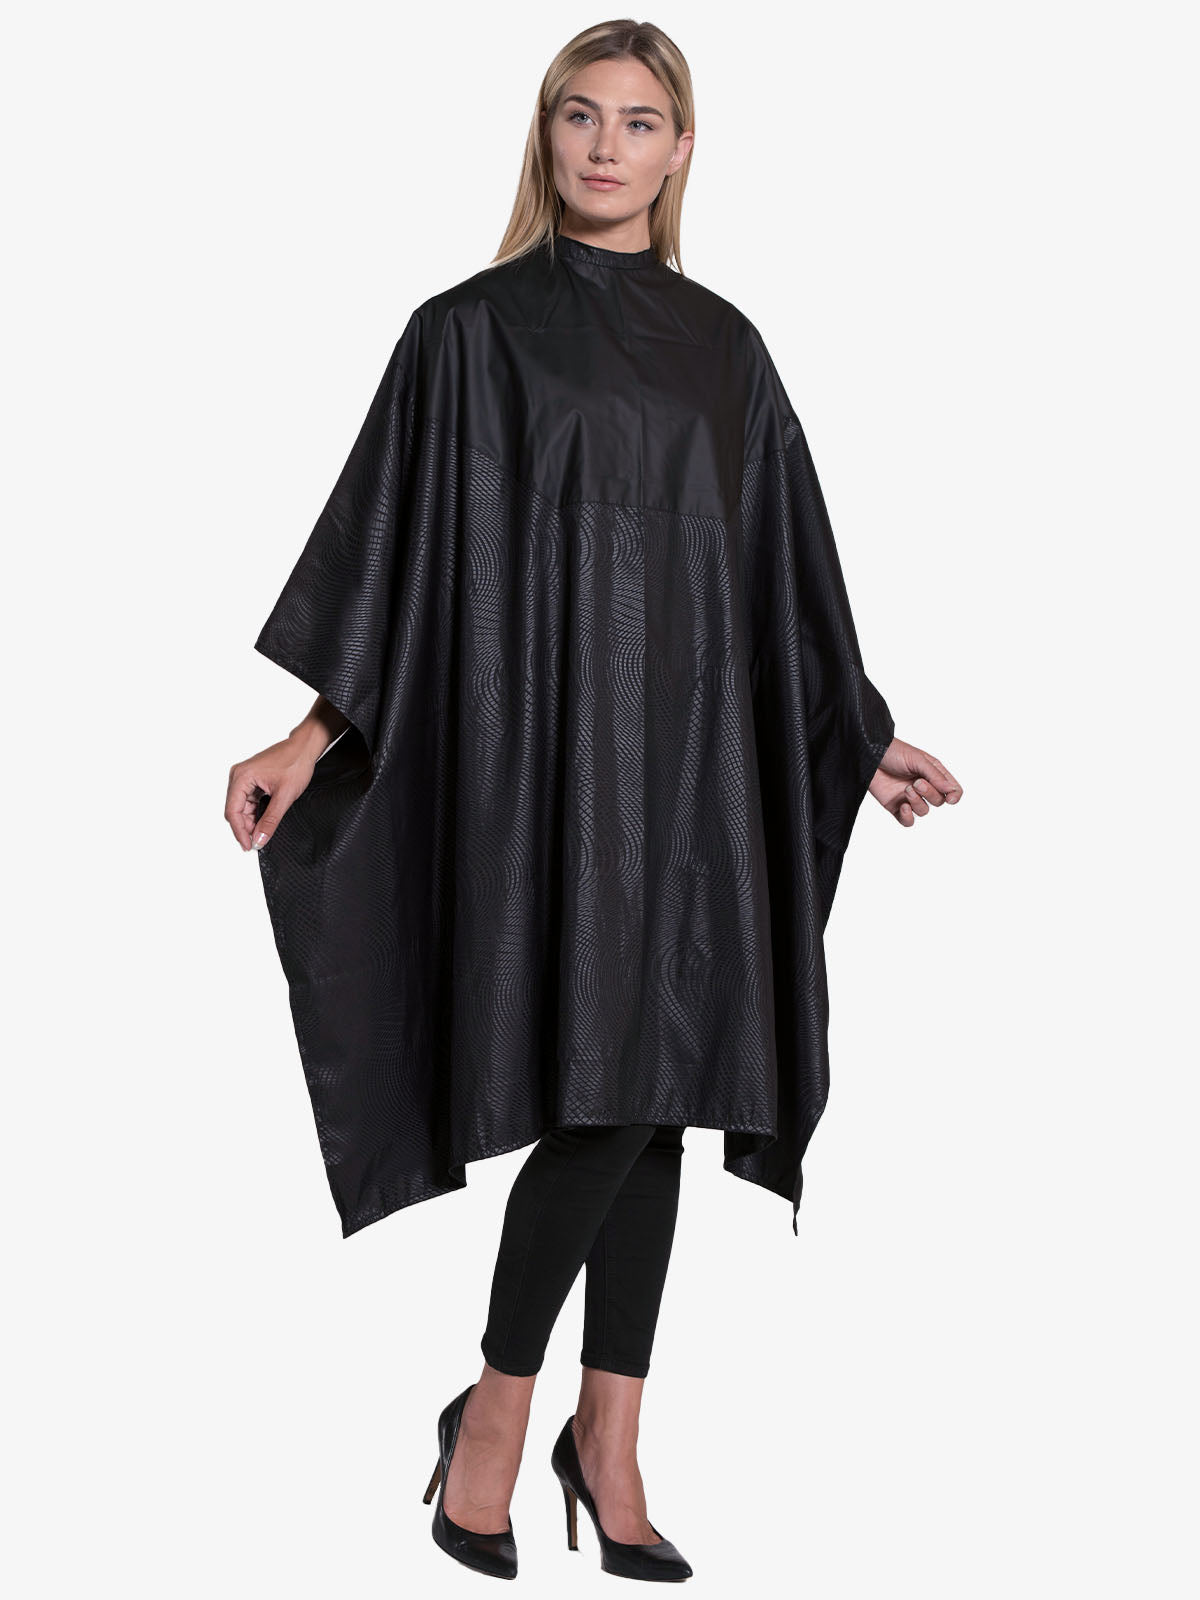 Cosmix All Purpose Chemical Proof Cape